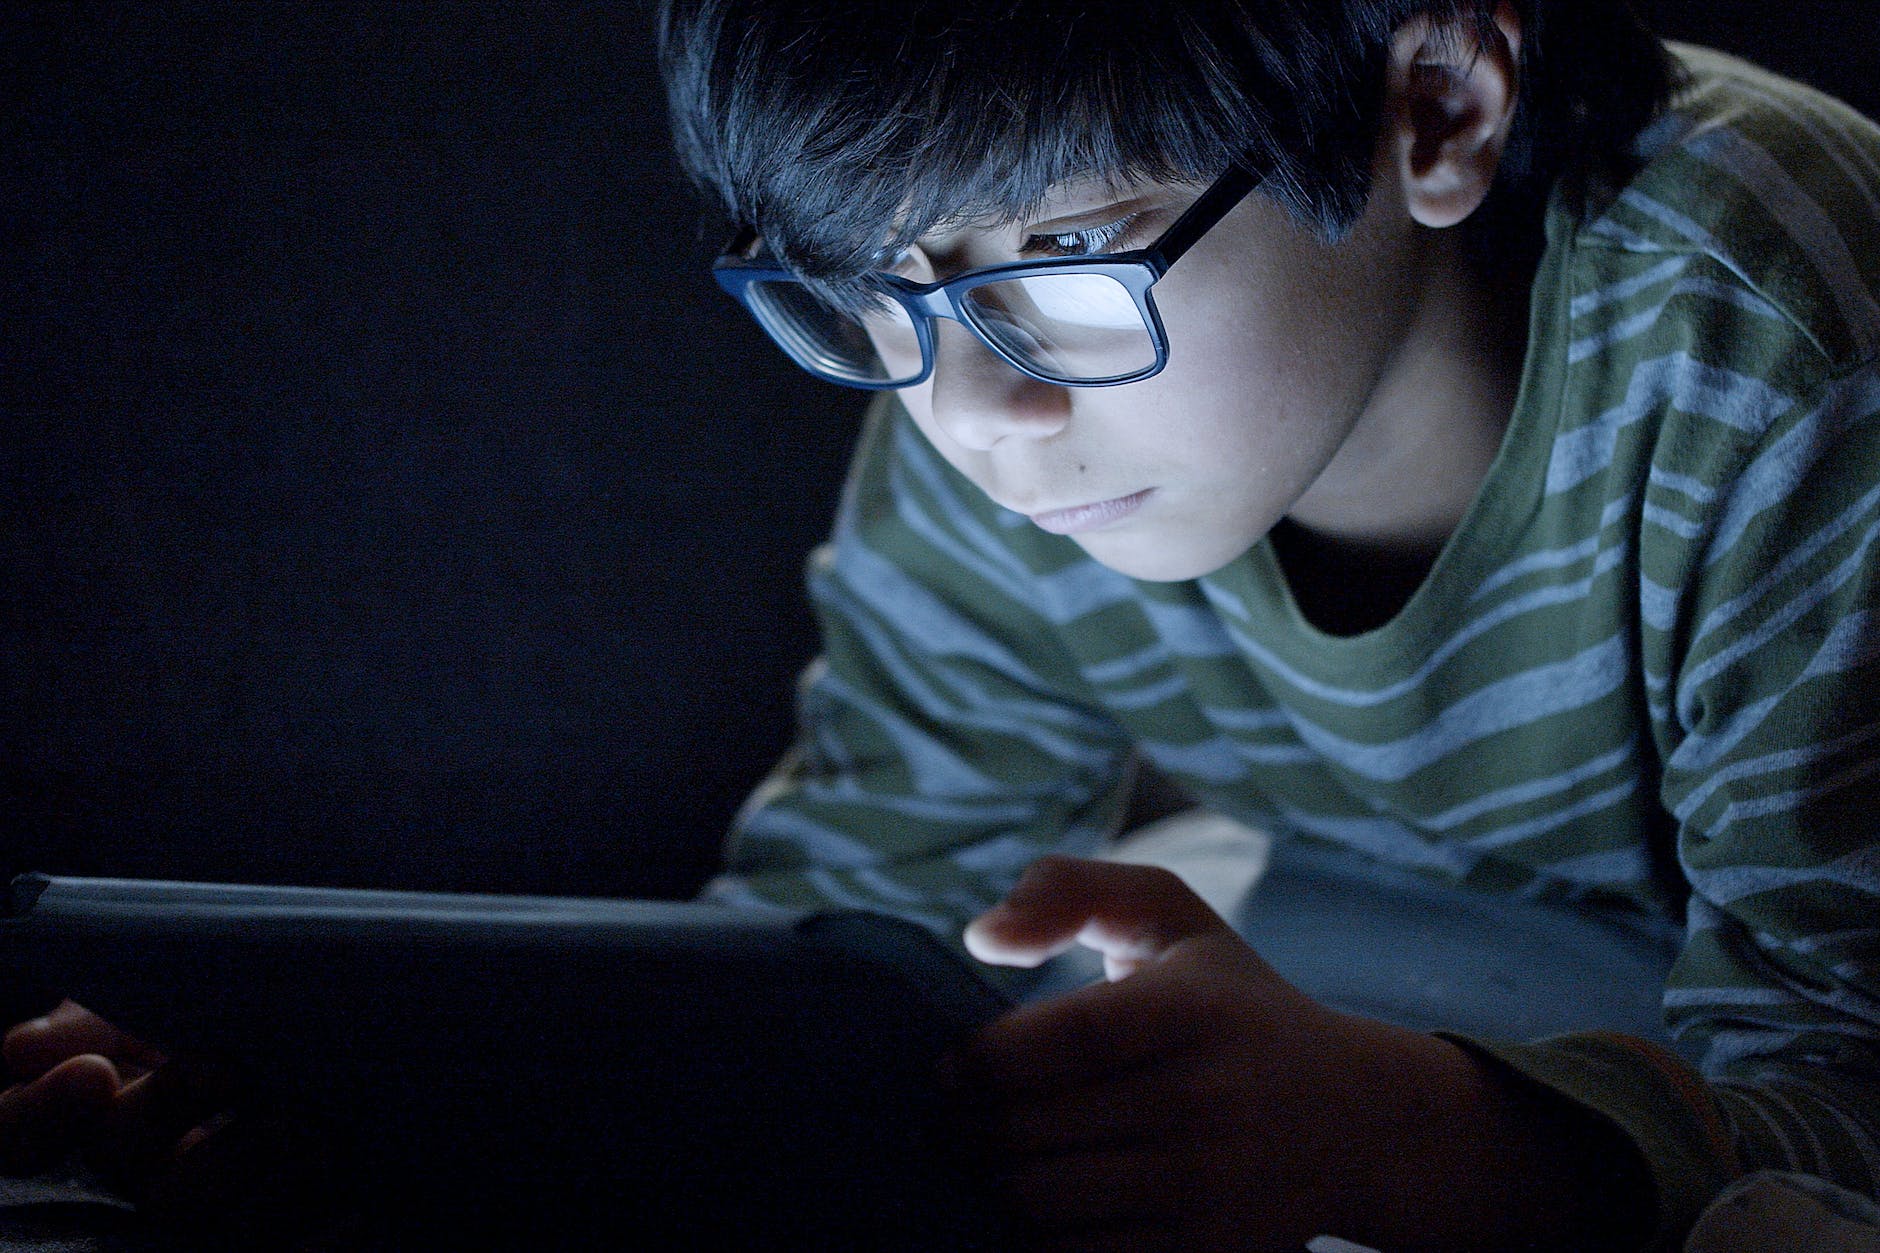 Excessive Screen time causing Dry Eye problems in Kids, experts warn